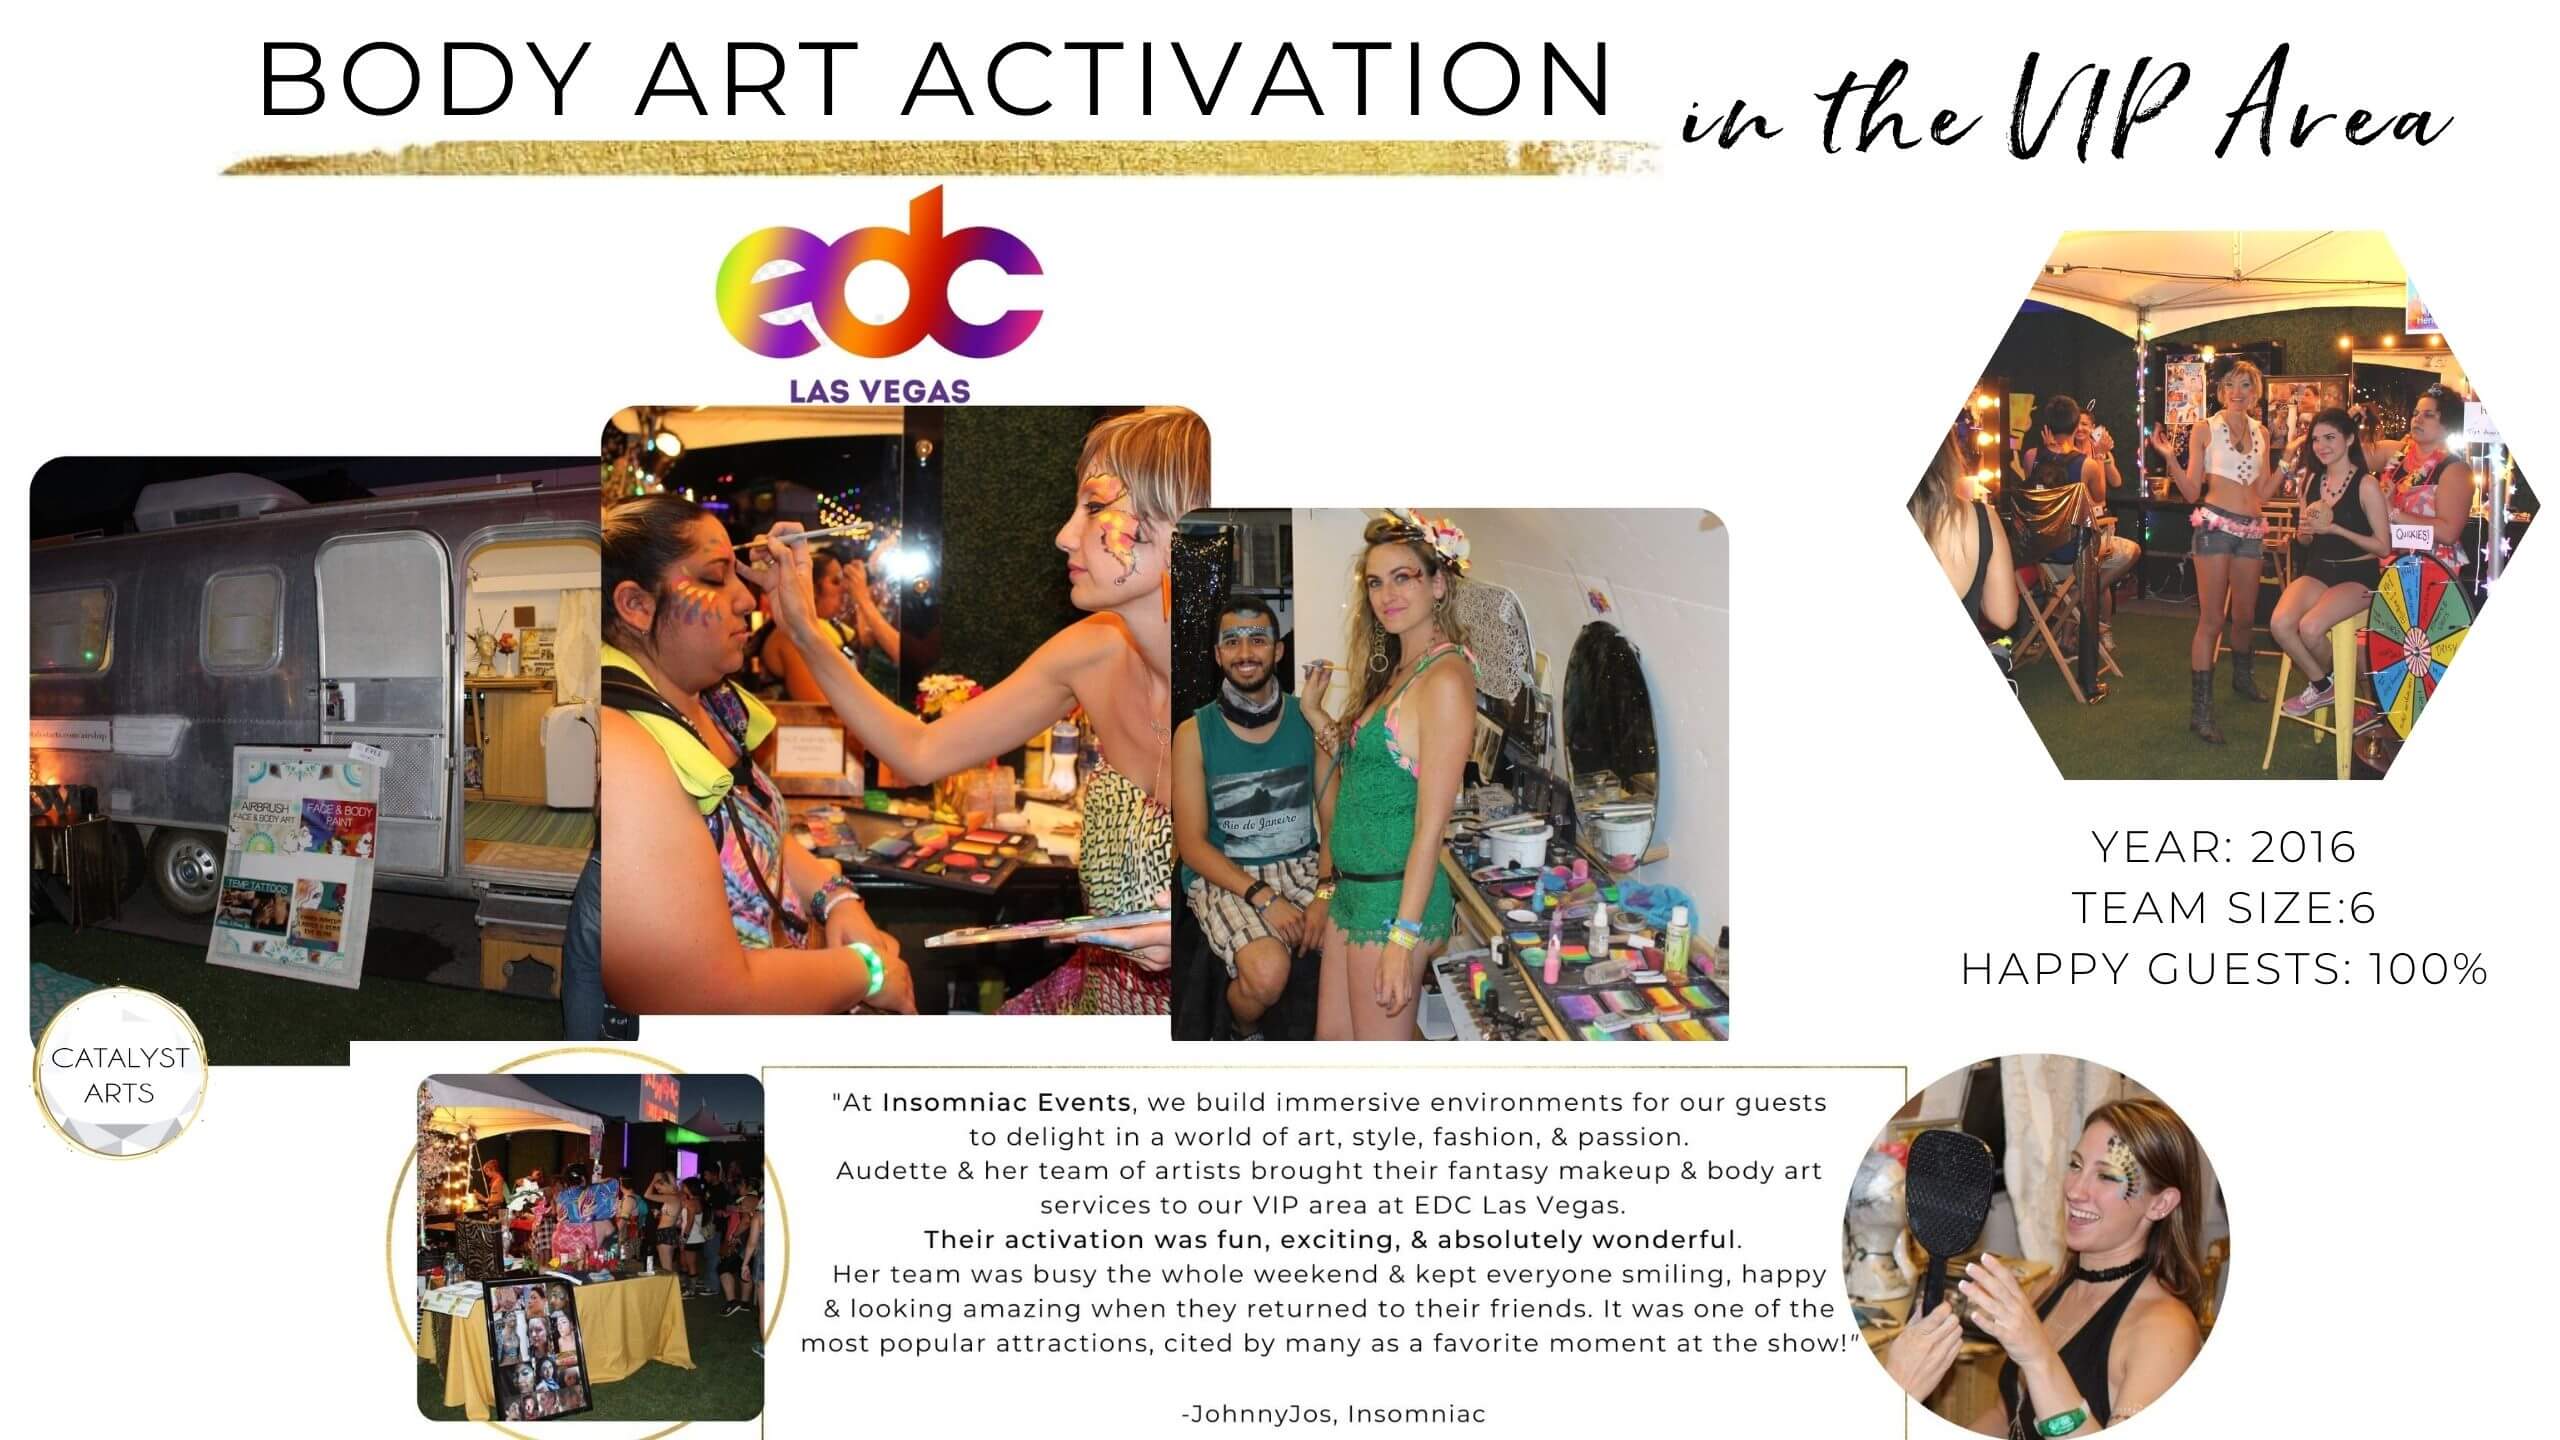 Catalyst Arts Body Art Activation in VIP at EDC Vegas by Insomniac